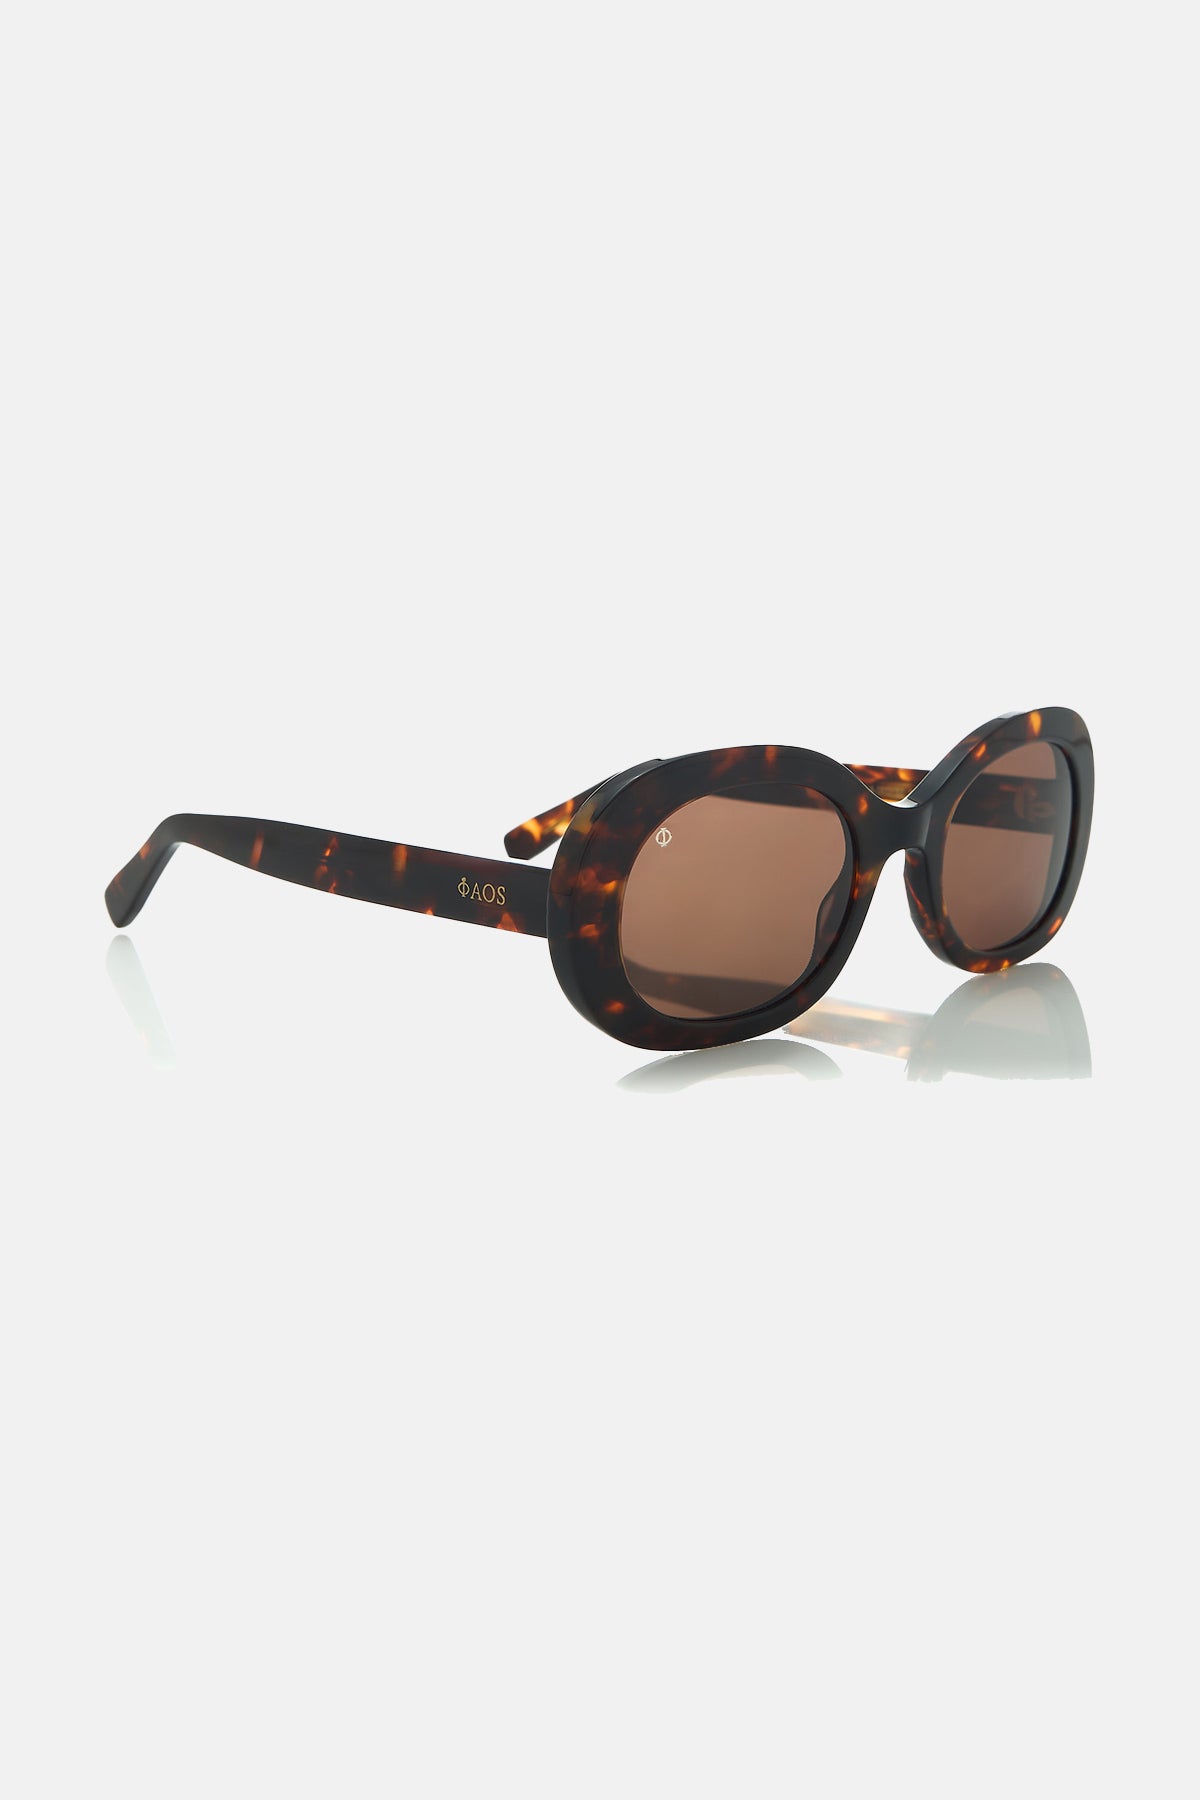 SUNGLASSES "ITHACA" MARBLE BROWN